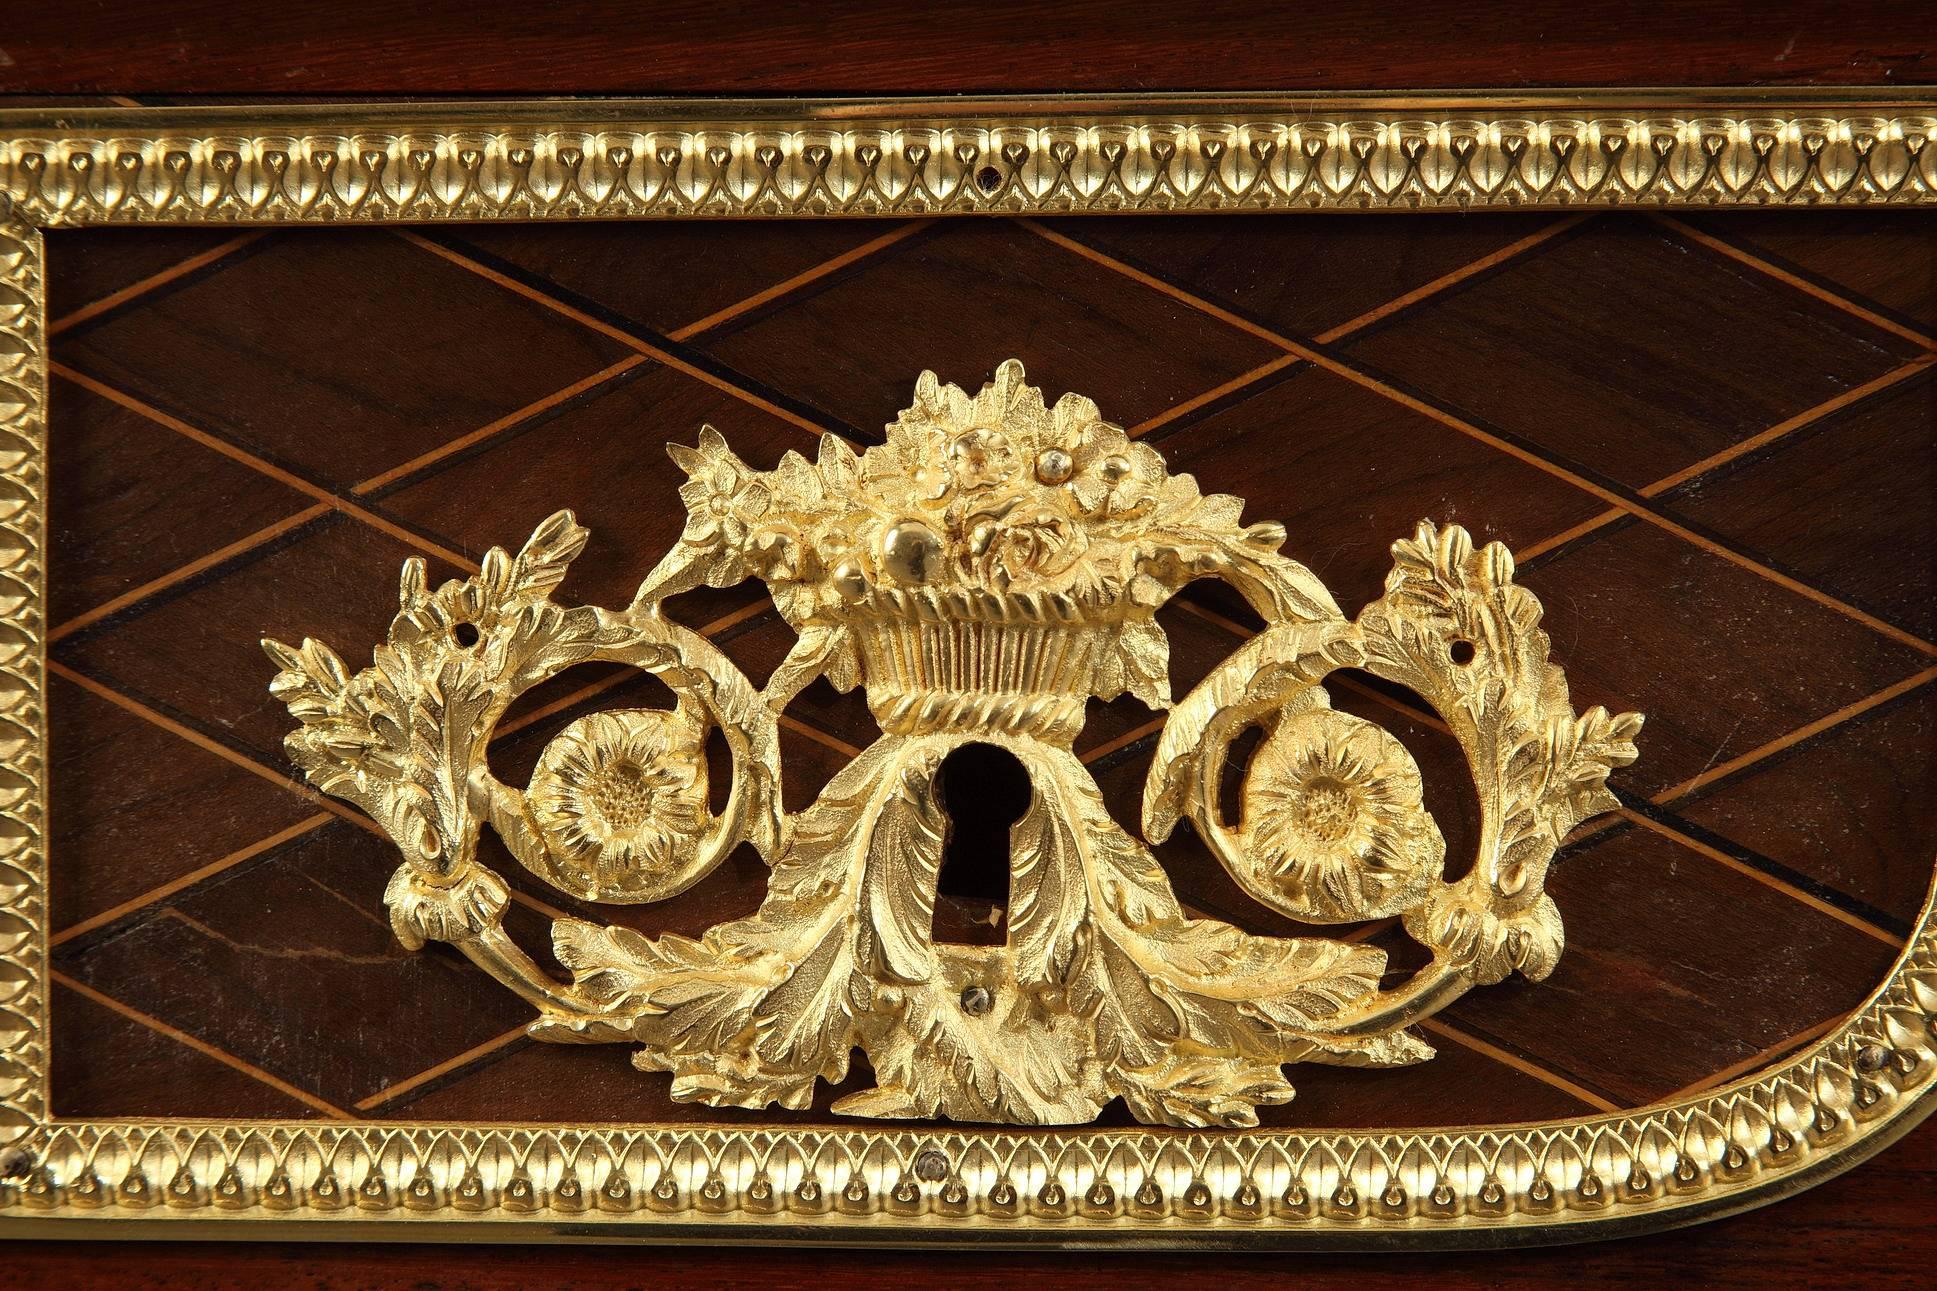 Gilt Marquetry Rolltop Desk after One Commissioned by Marie-Antoinette to Riesener